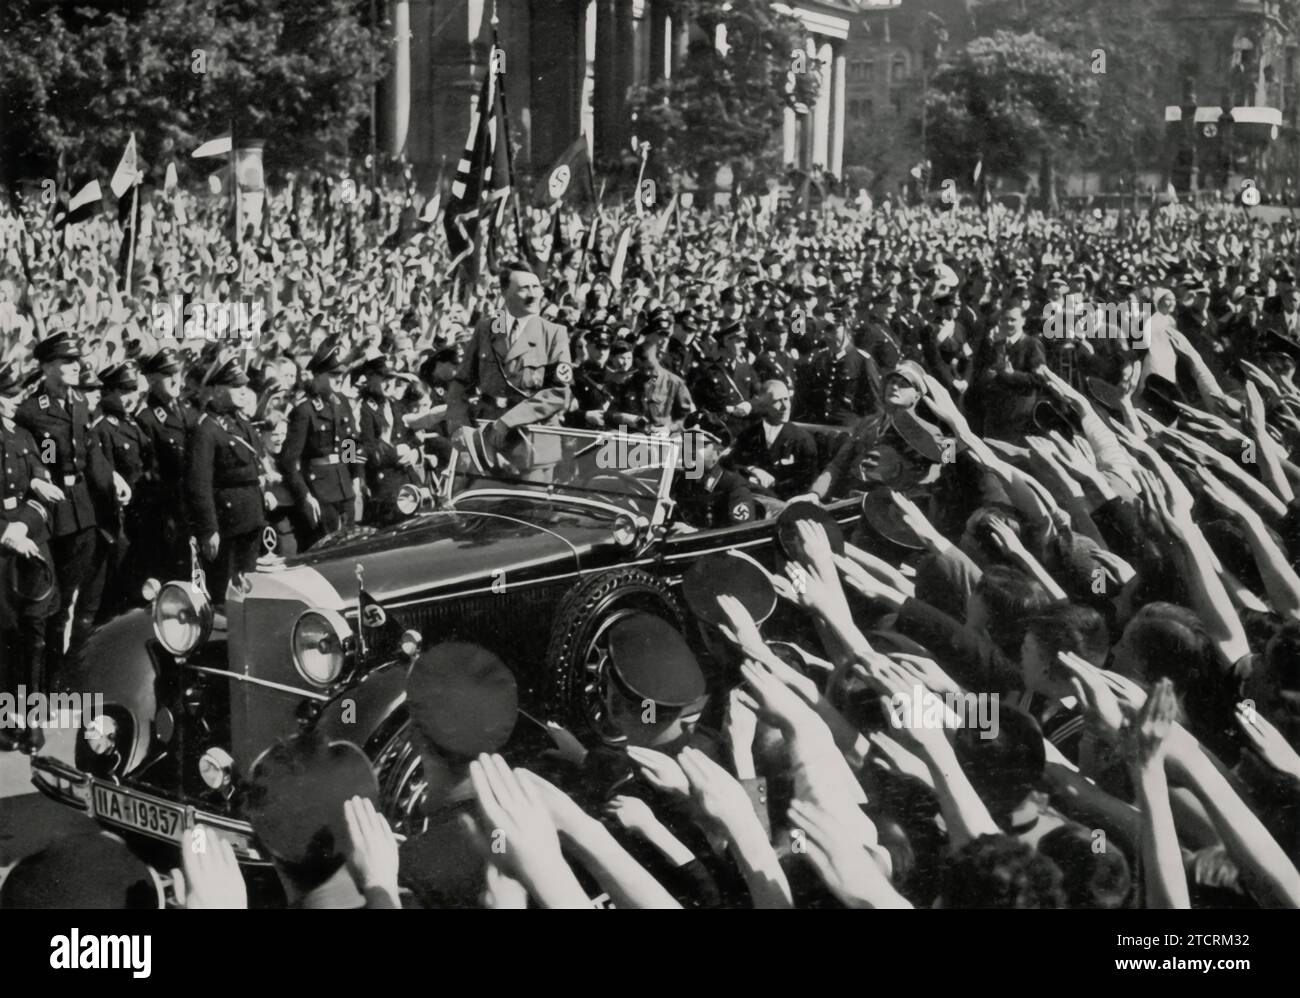 On the Day of National Labor in 1934, after delivering a significant speech to the youth at a rally in Berlin's Lustgarten on May 1st, Adolf Hitler is seen departing the event. This occasion was part of the celebrations and observances marking the Day of National Labor, a day the Nazi regime used to promote its ideals on work and the national community. Hitler's address to the youth, a key target audience for Nazi propaganda, was significant in instilling the regime's values and ideologies. Stock Photo